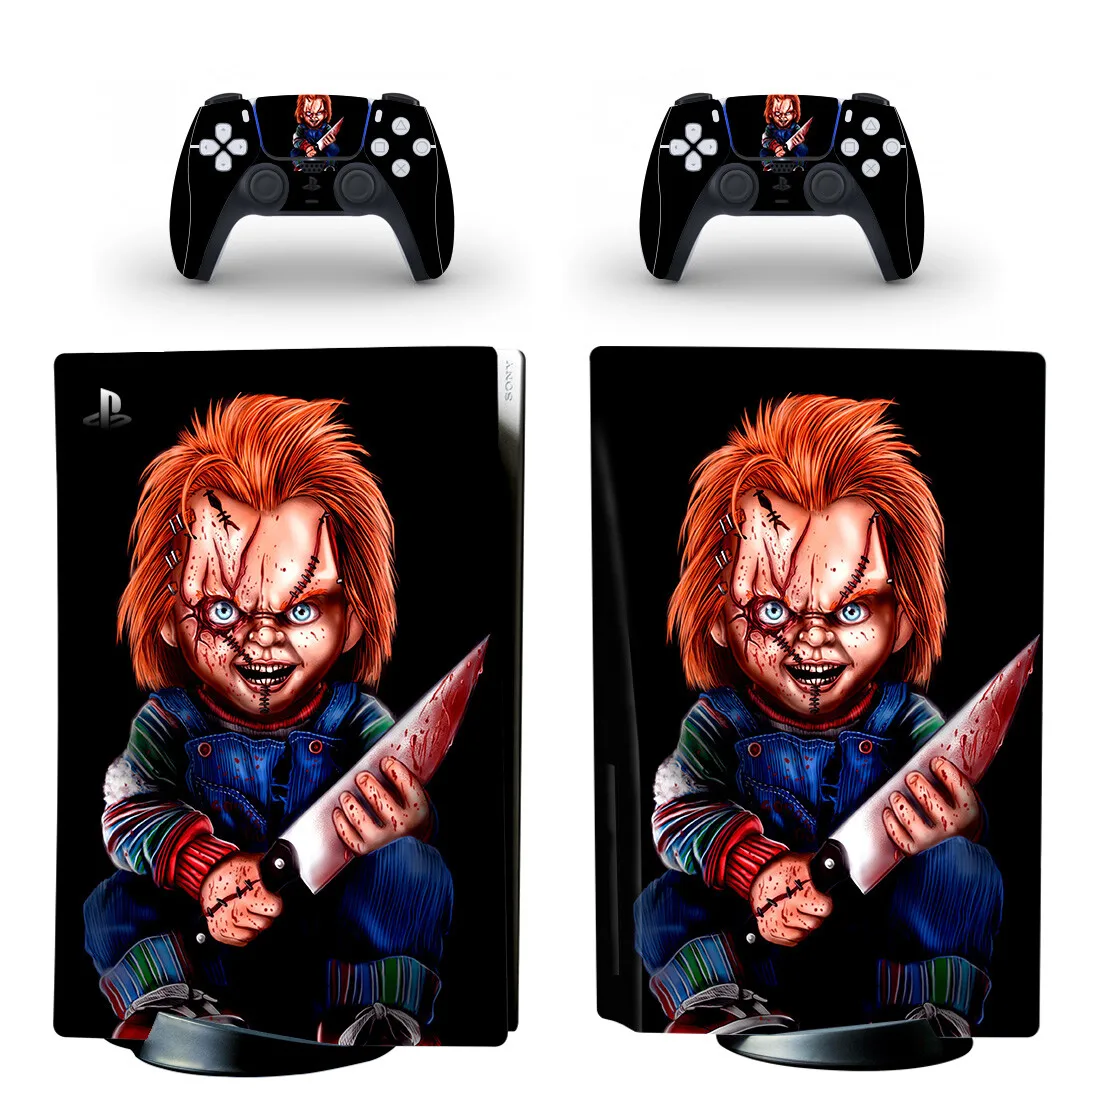 

Child's Play Chucky PS5 Disc Skin Sticker Cover for Playstation 5 Console & Controllers Decal Vinyl Protective PS5 Disk Skins